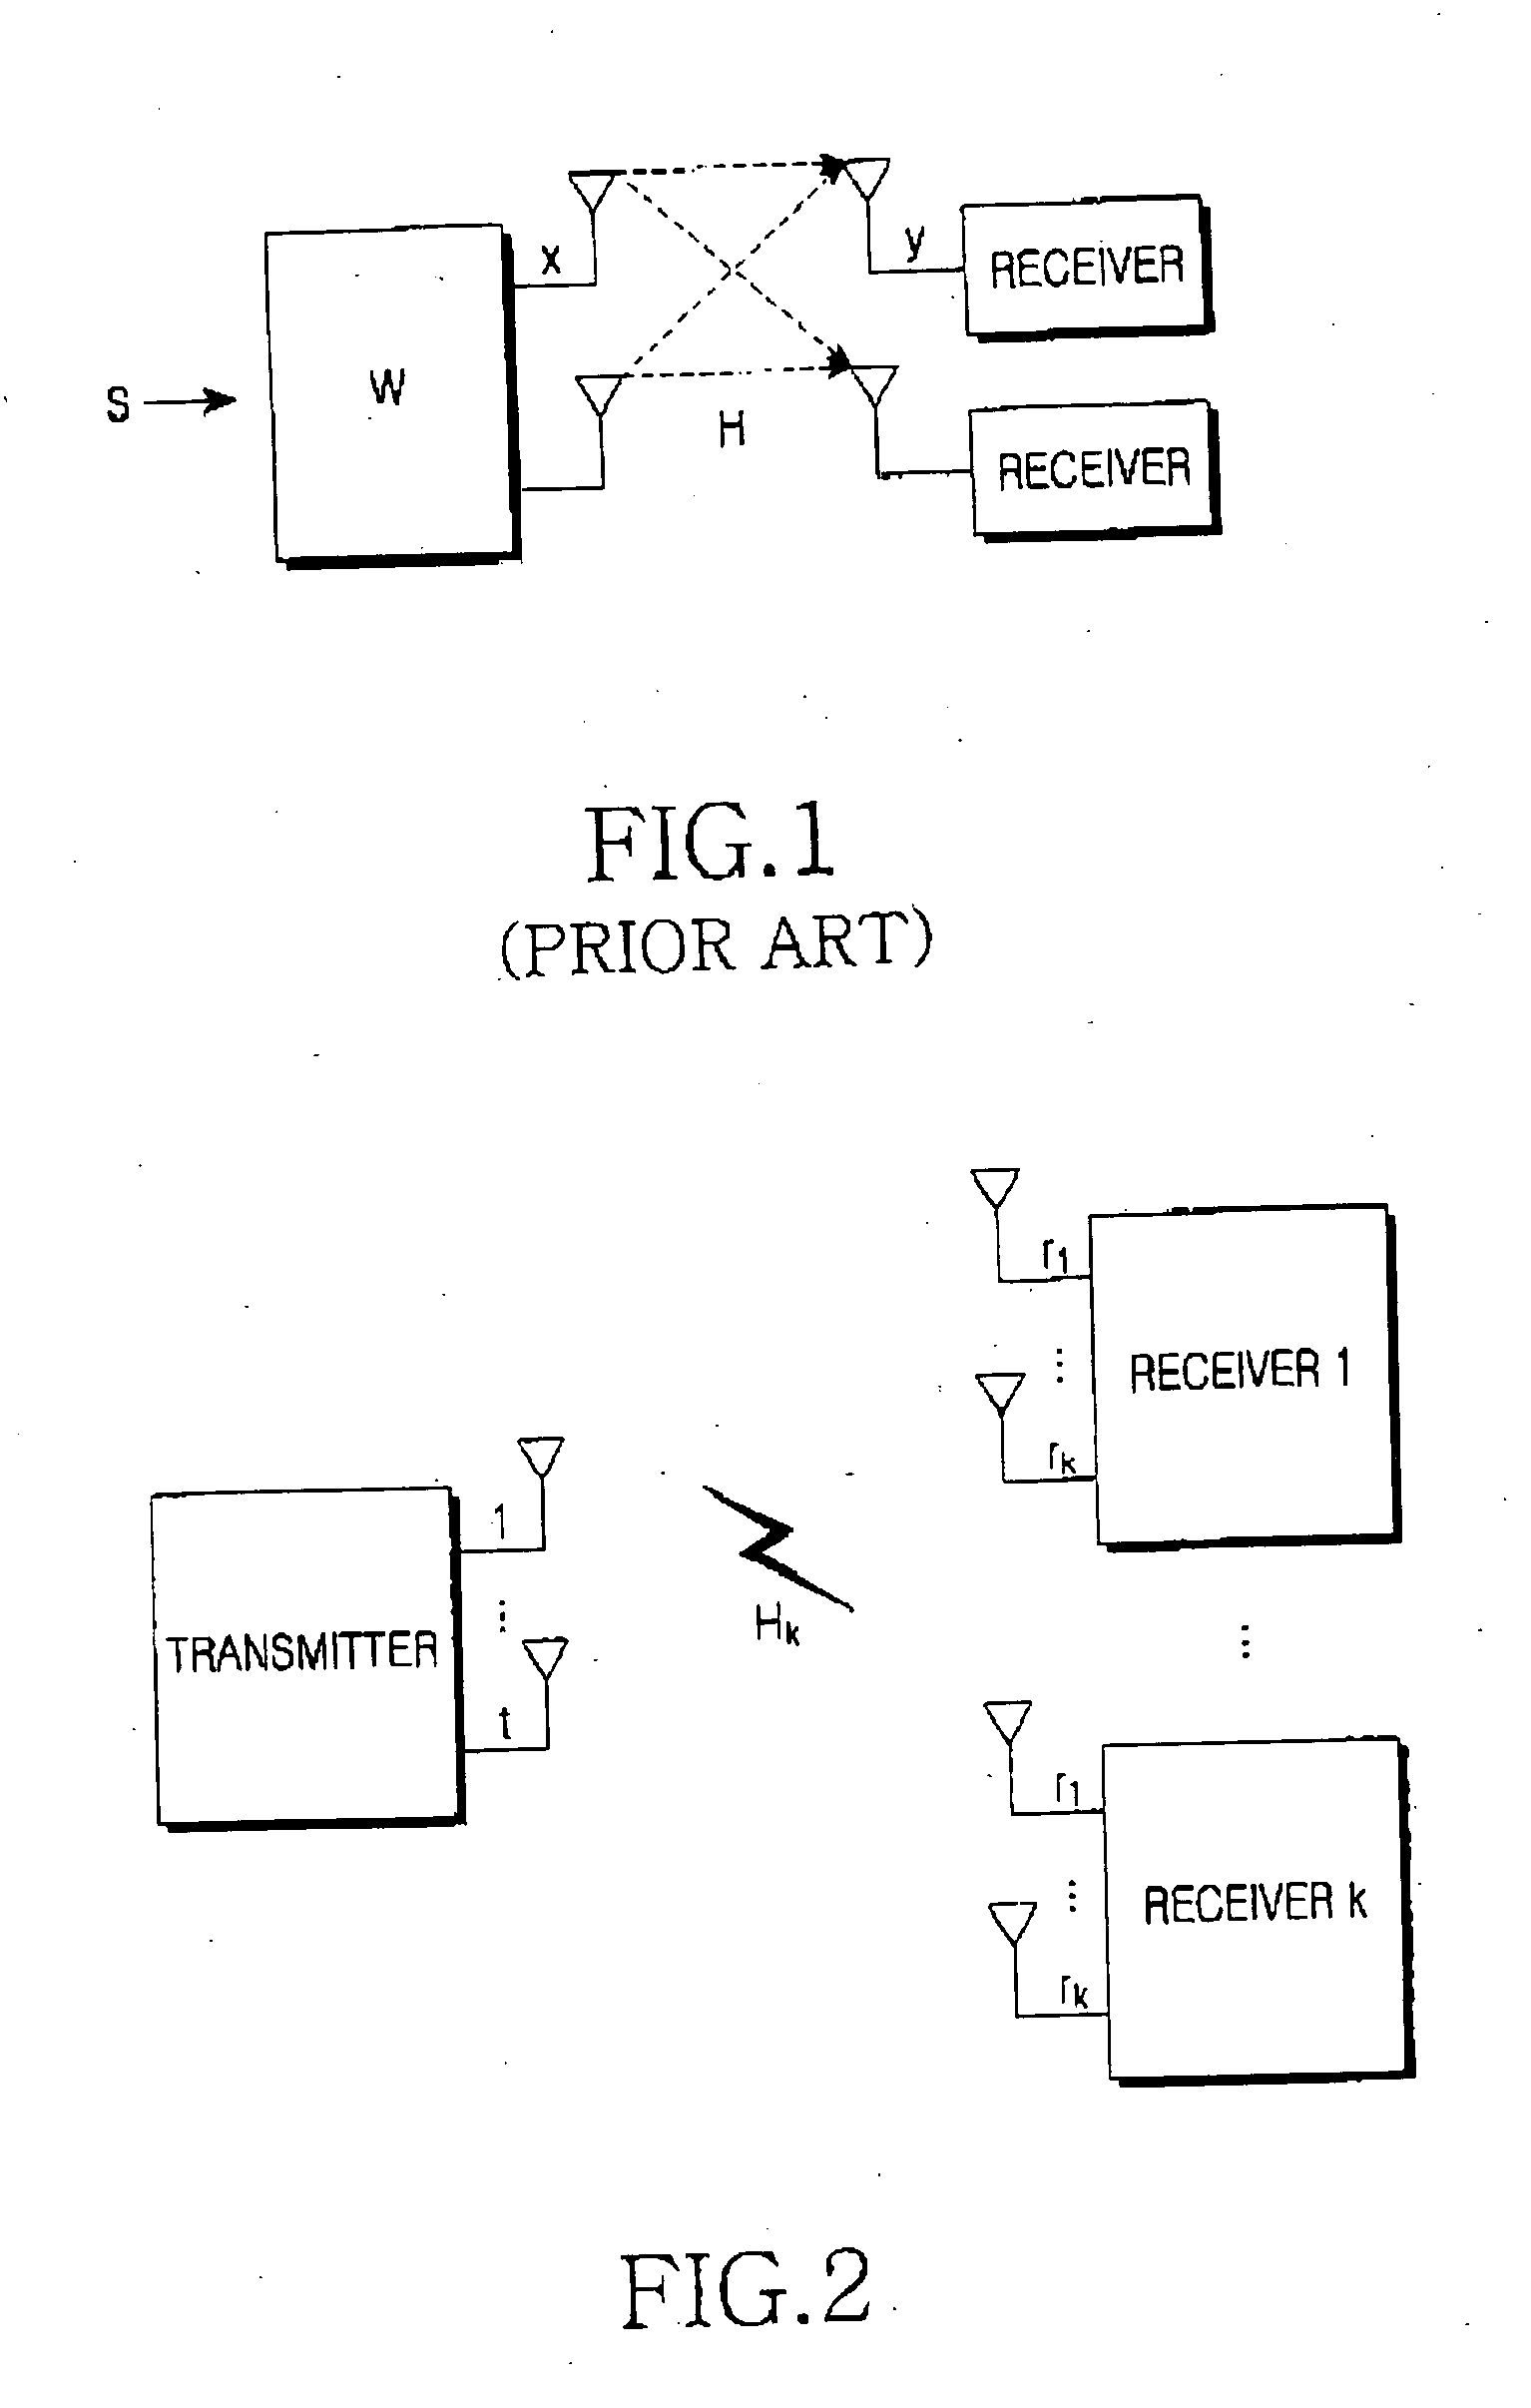 Method and apparatus for transmitting/receiving data in a multiple-input multiple-output communication system